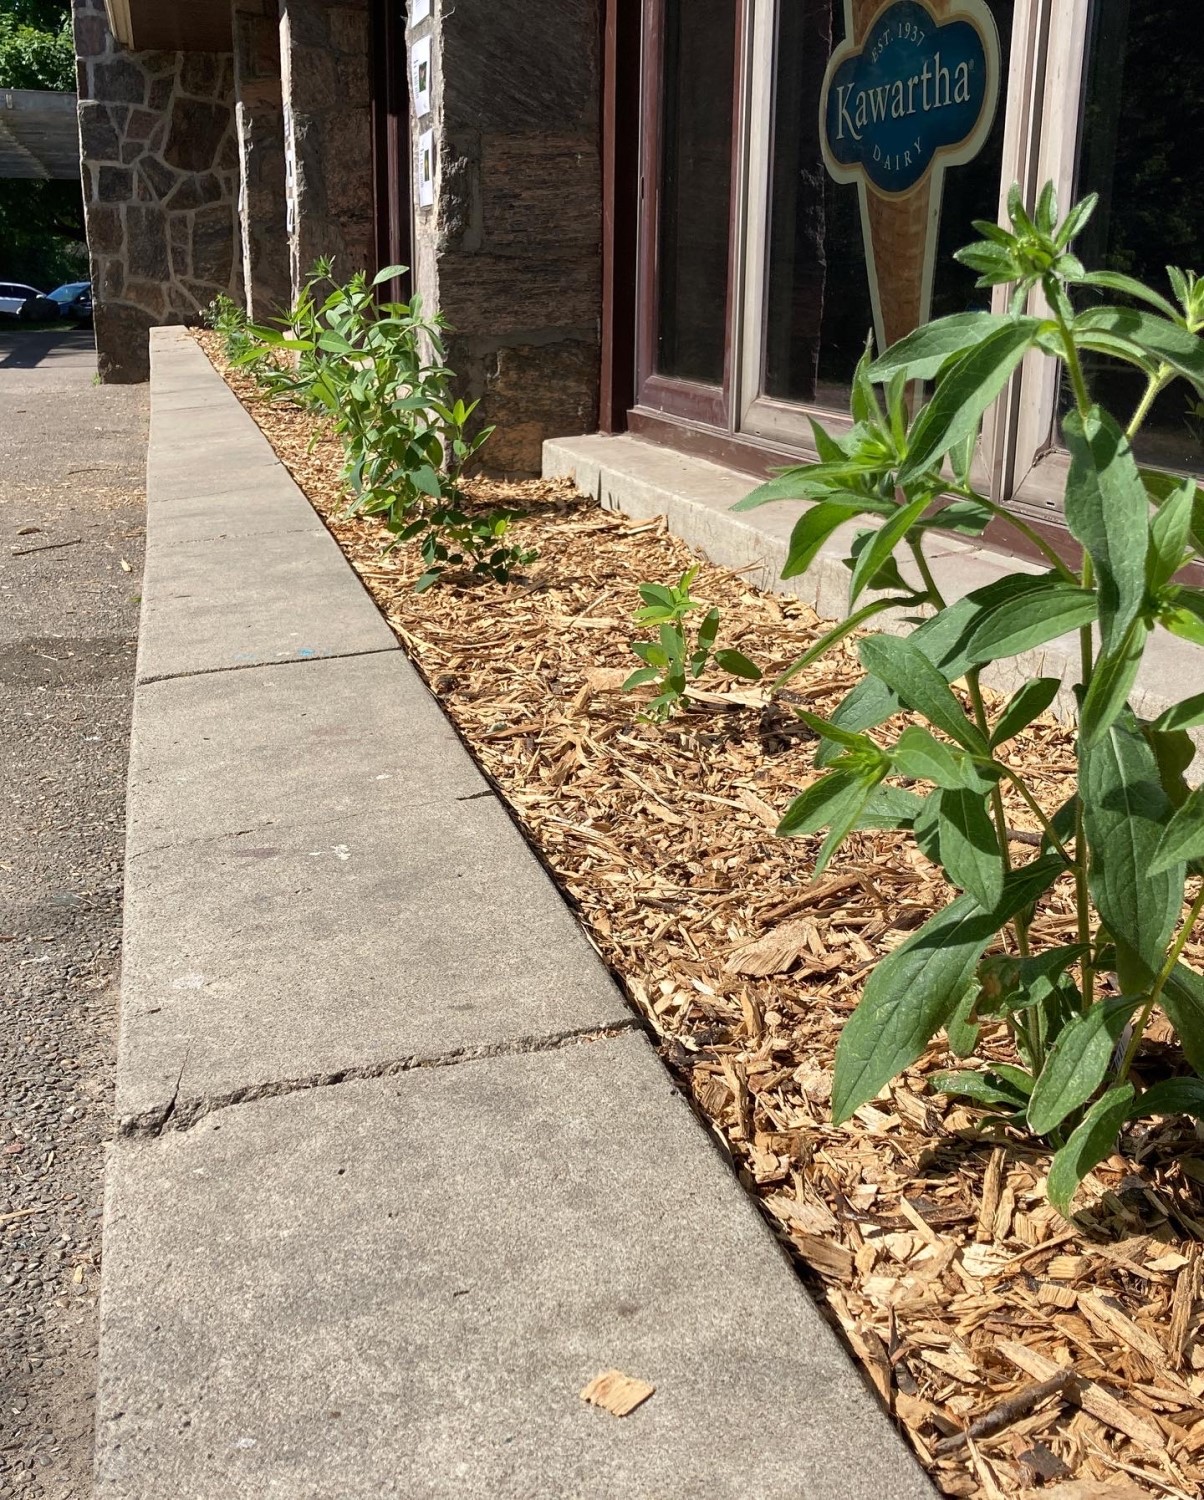 A garden with tall green plants surrounded by mulch. The garden is between a sidewalk and a store window.